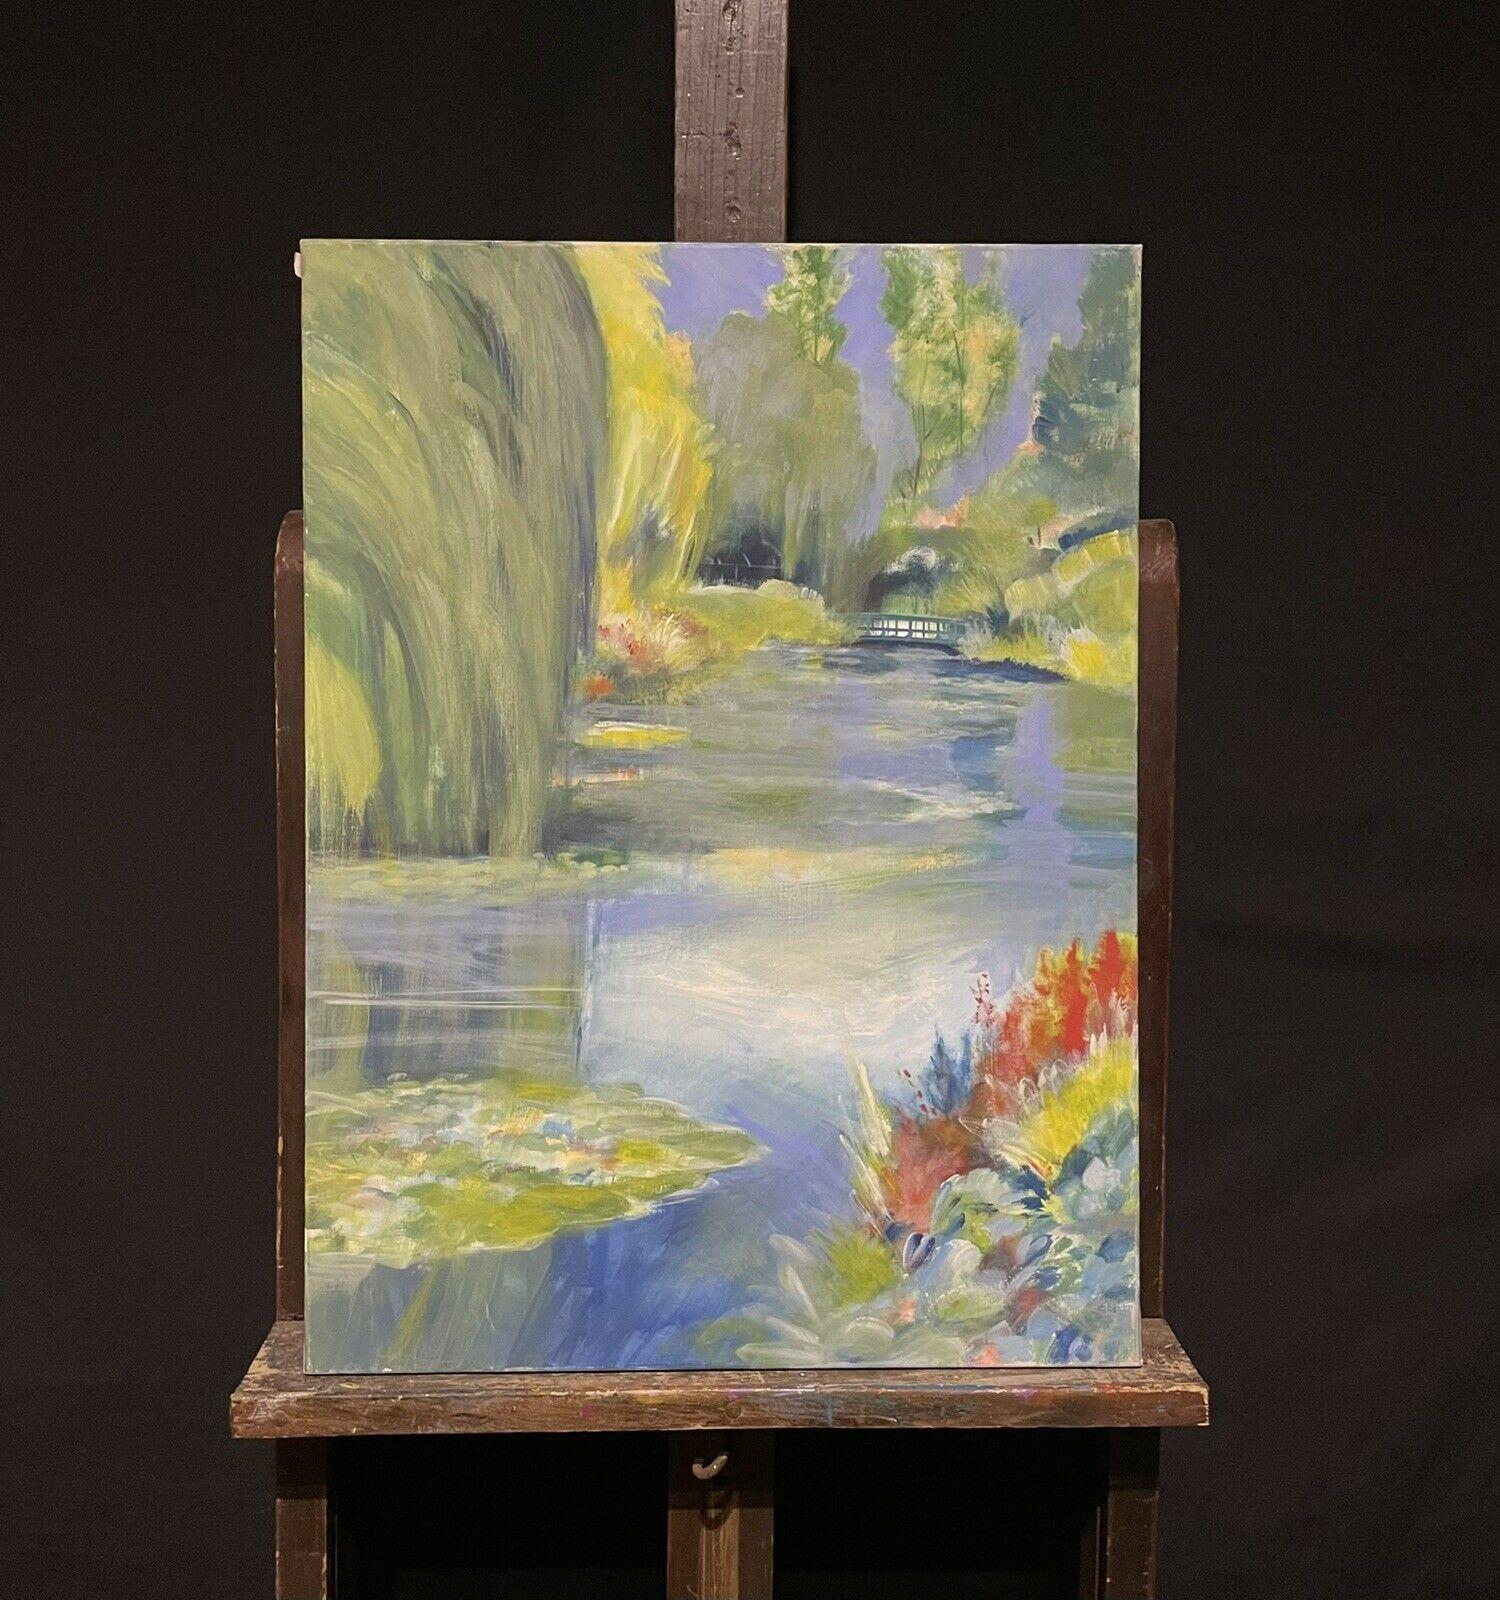 Artist/ School: French Impressionist artist, indistinctly signed to the reverse

Title: Claude Monet's Garden at Giverny

Medium: oil painting on canvas, unframed

canvas:   28.75 x 21.25 inches

Provenance: private collection, France

Condition: